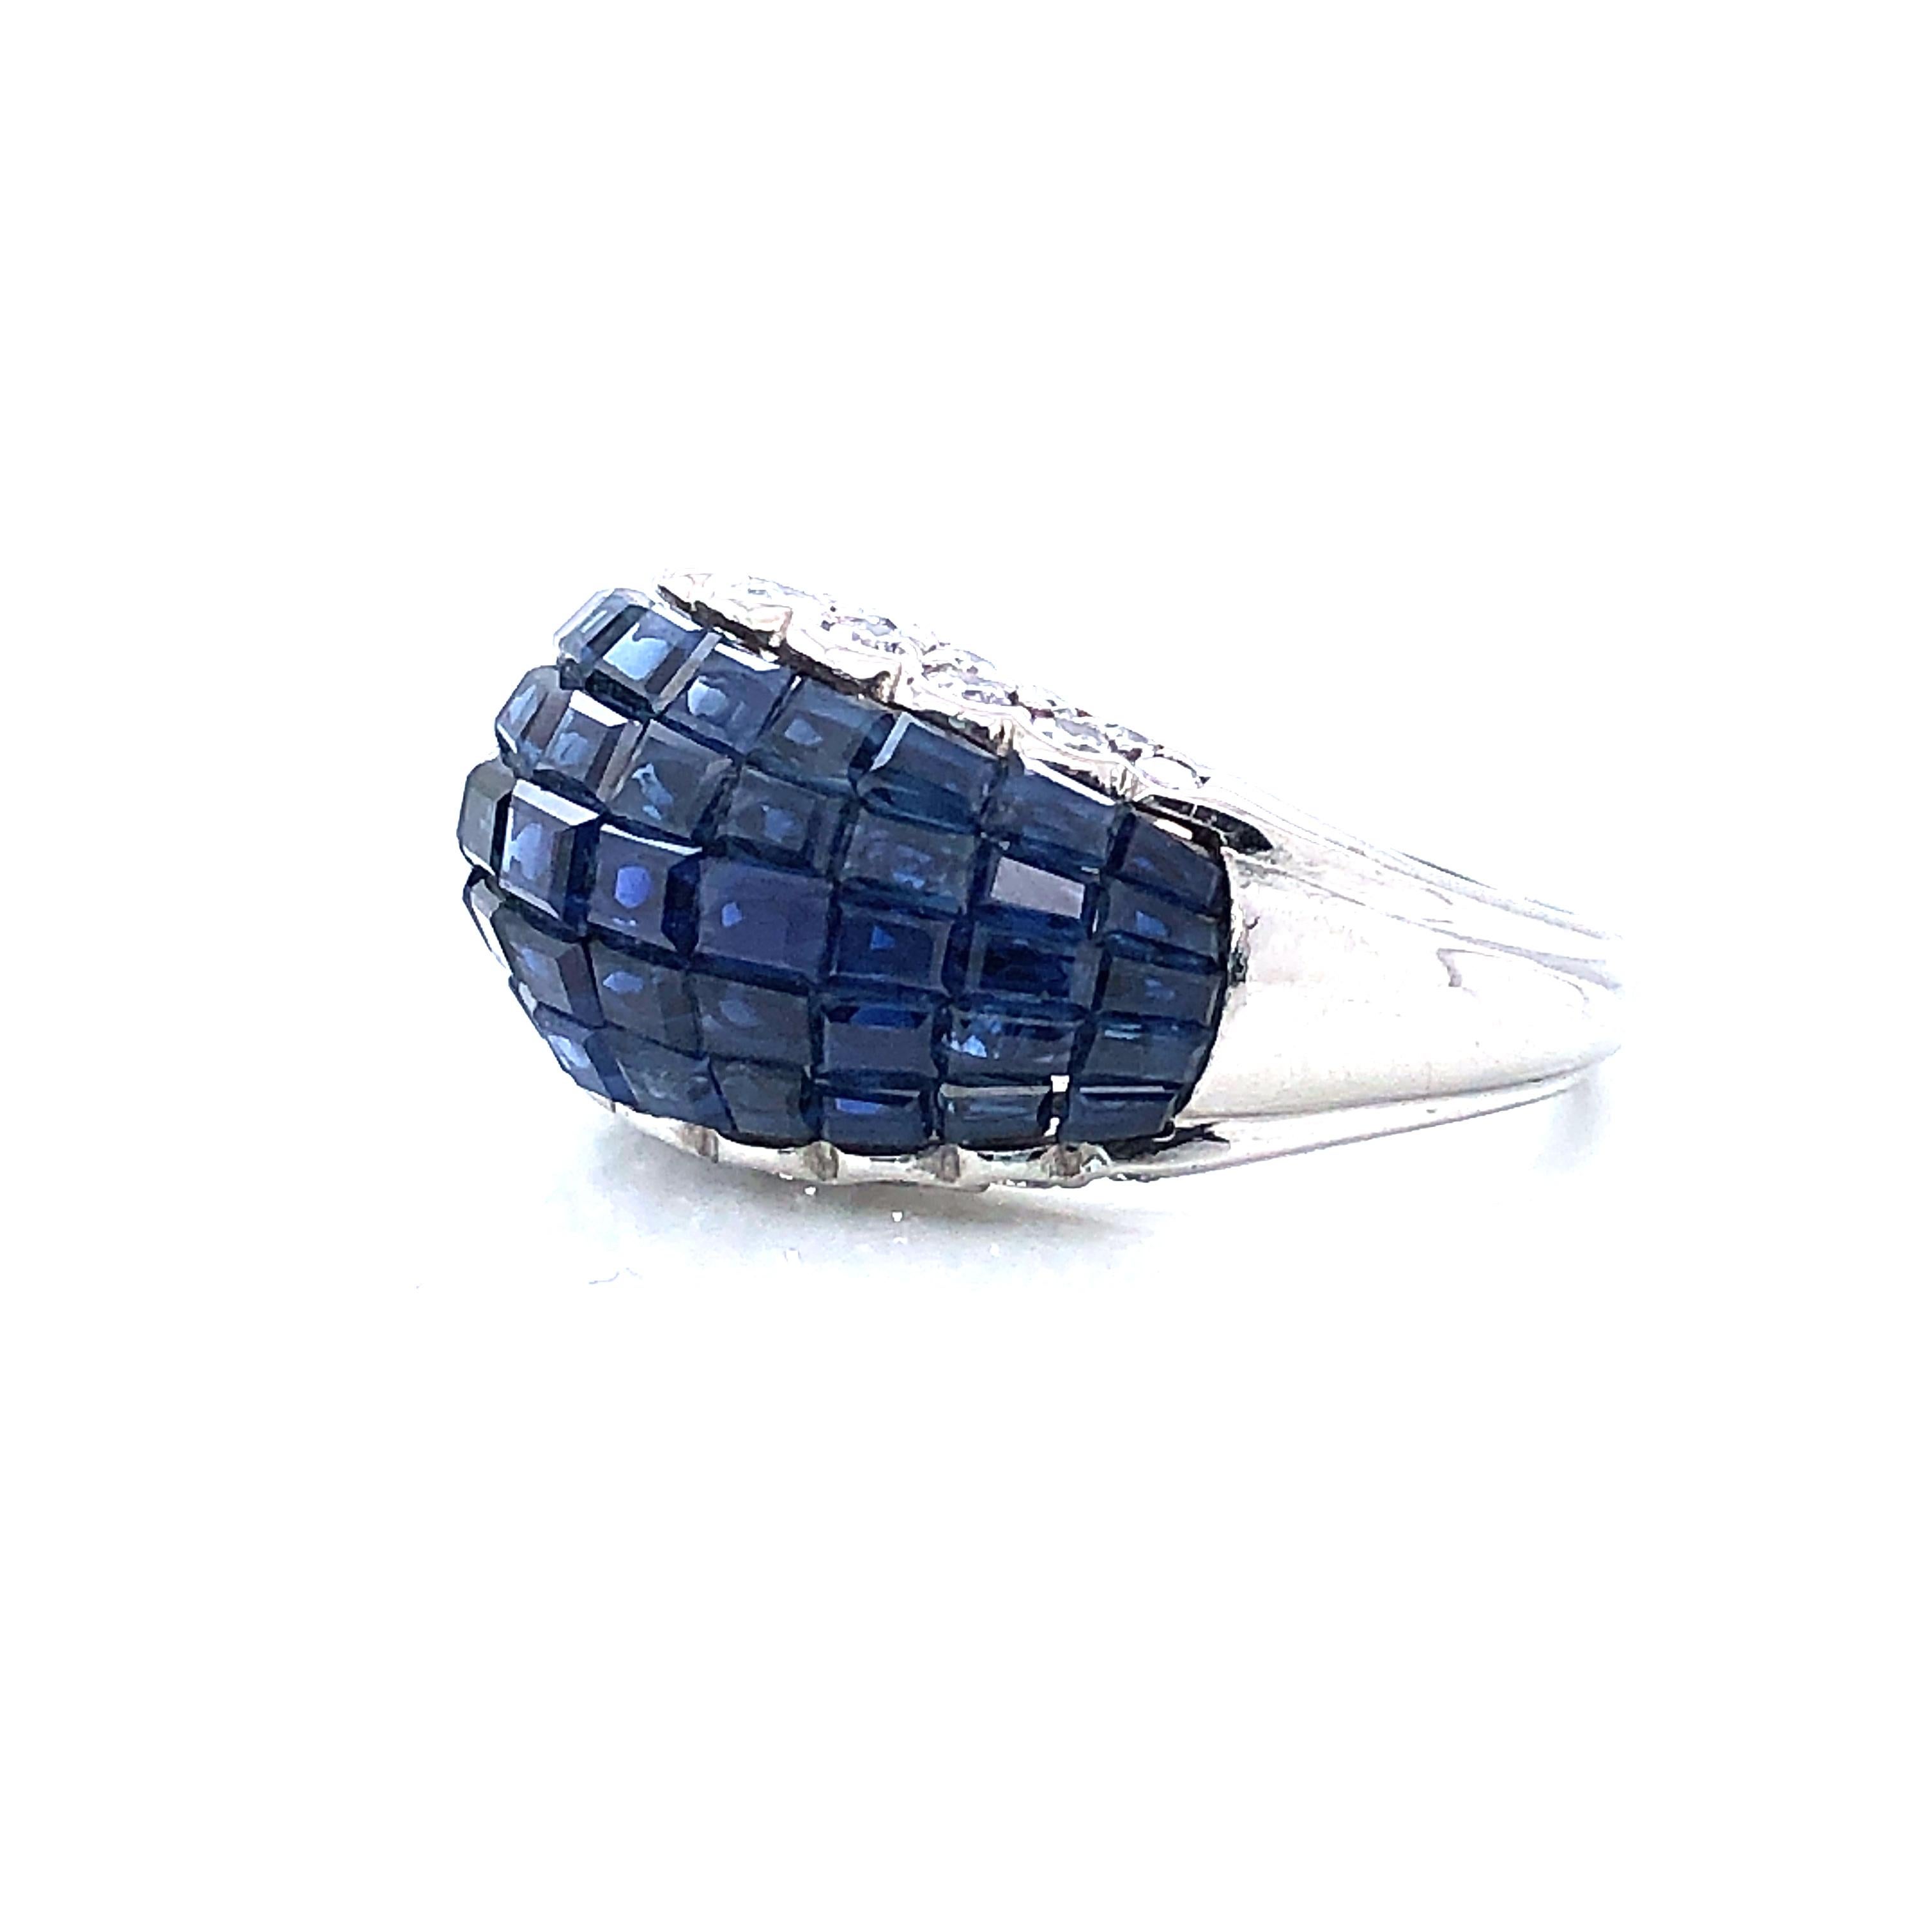 Oscar Heyman platinum ring contains 54 square sapphires in an invisible (or mystery) setting and 34 round diamonds (1.19cts). This piece is an impeccable specimen of invisibly set jewelry. The technique involves grooving the underside of square